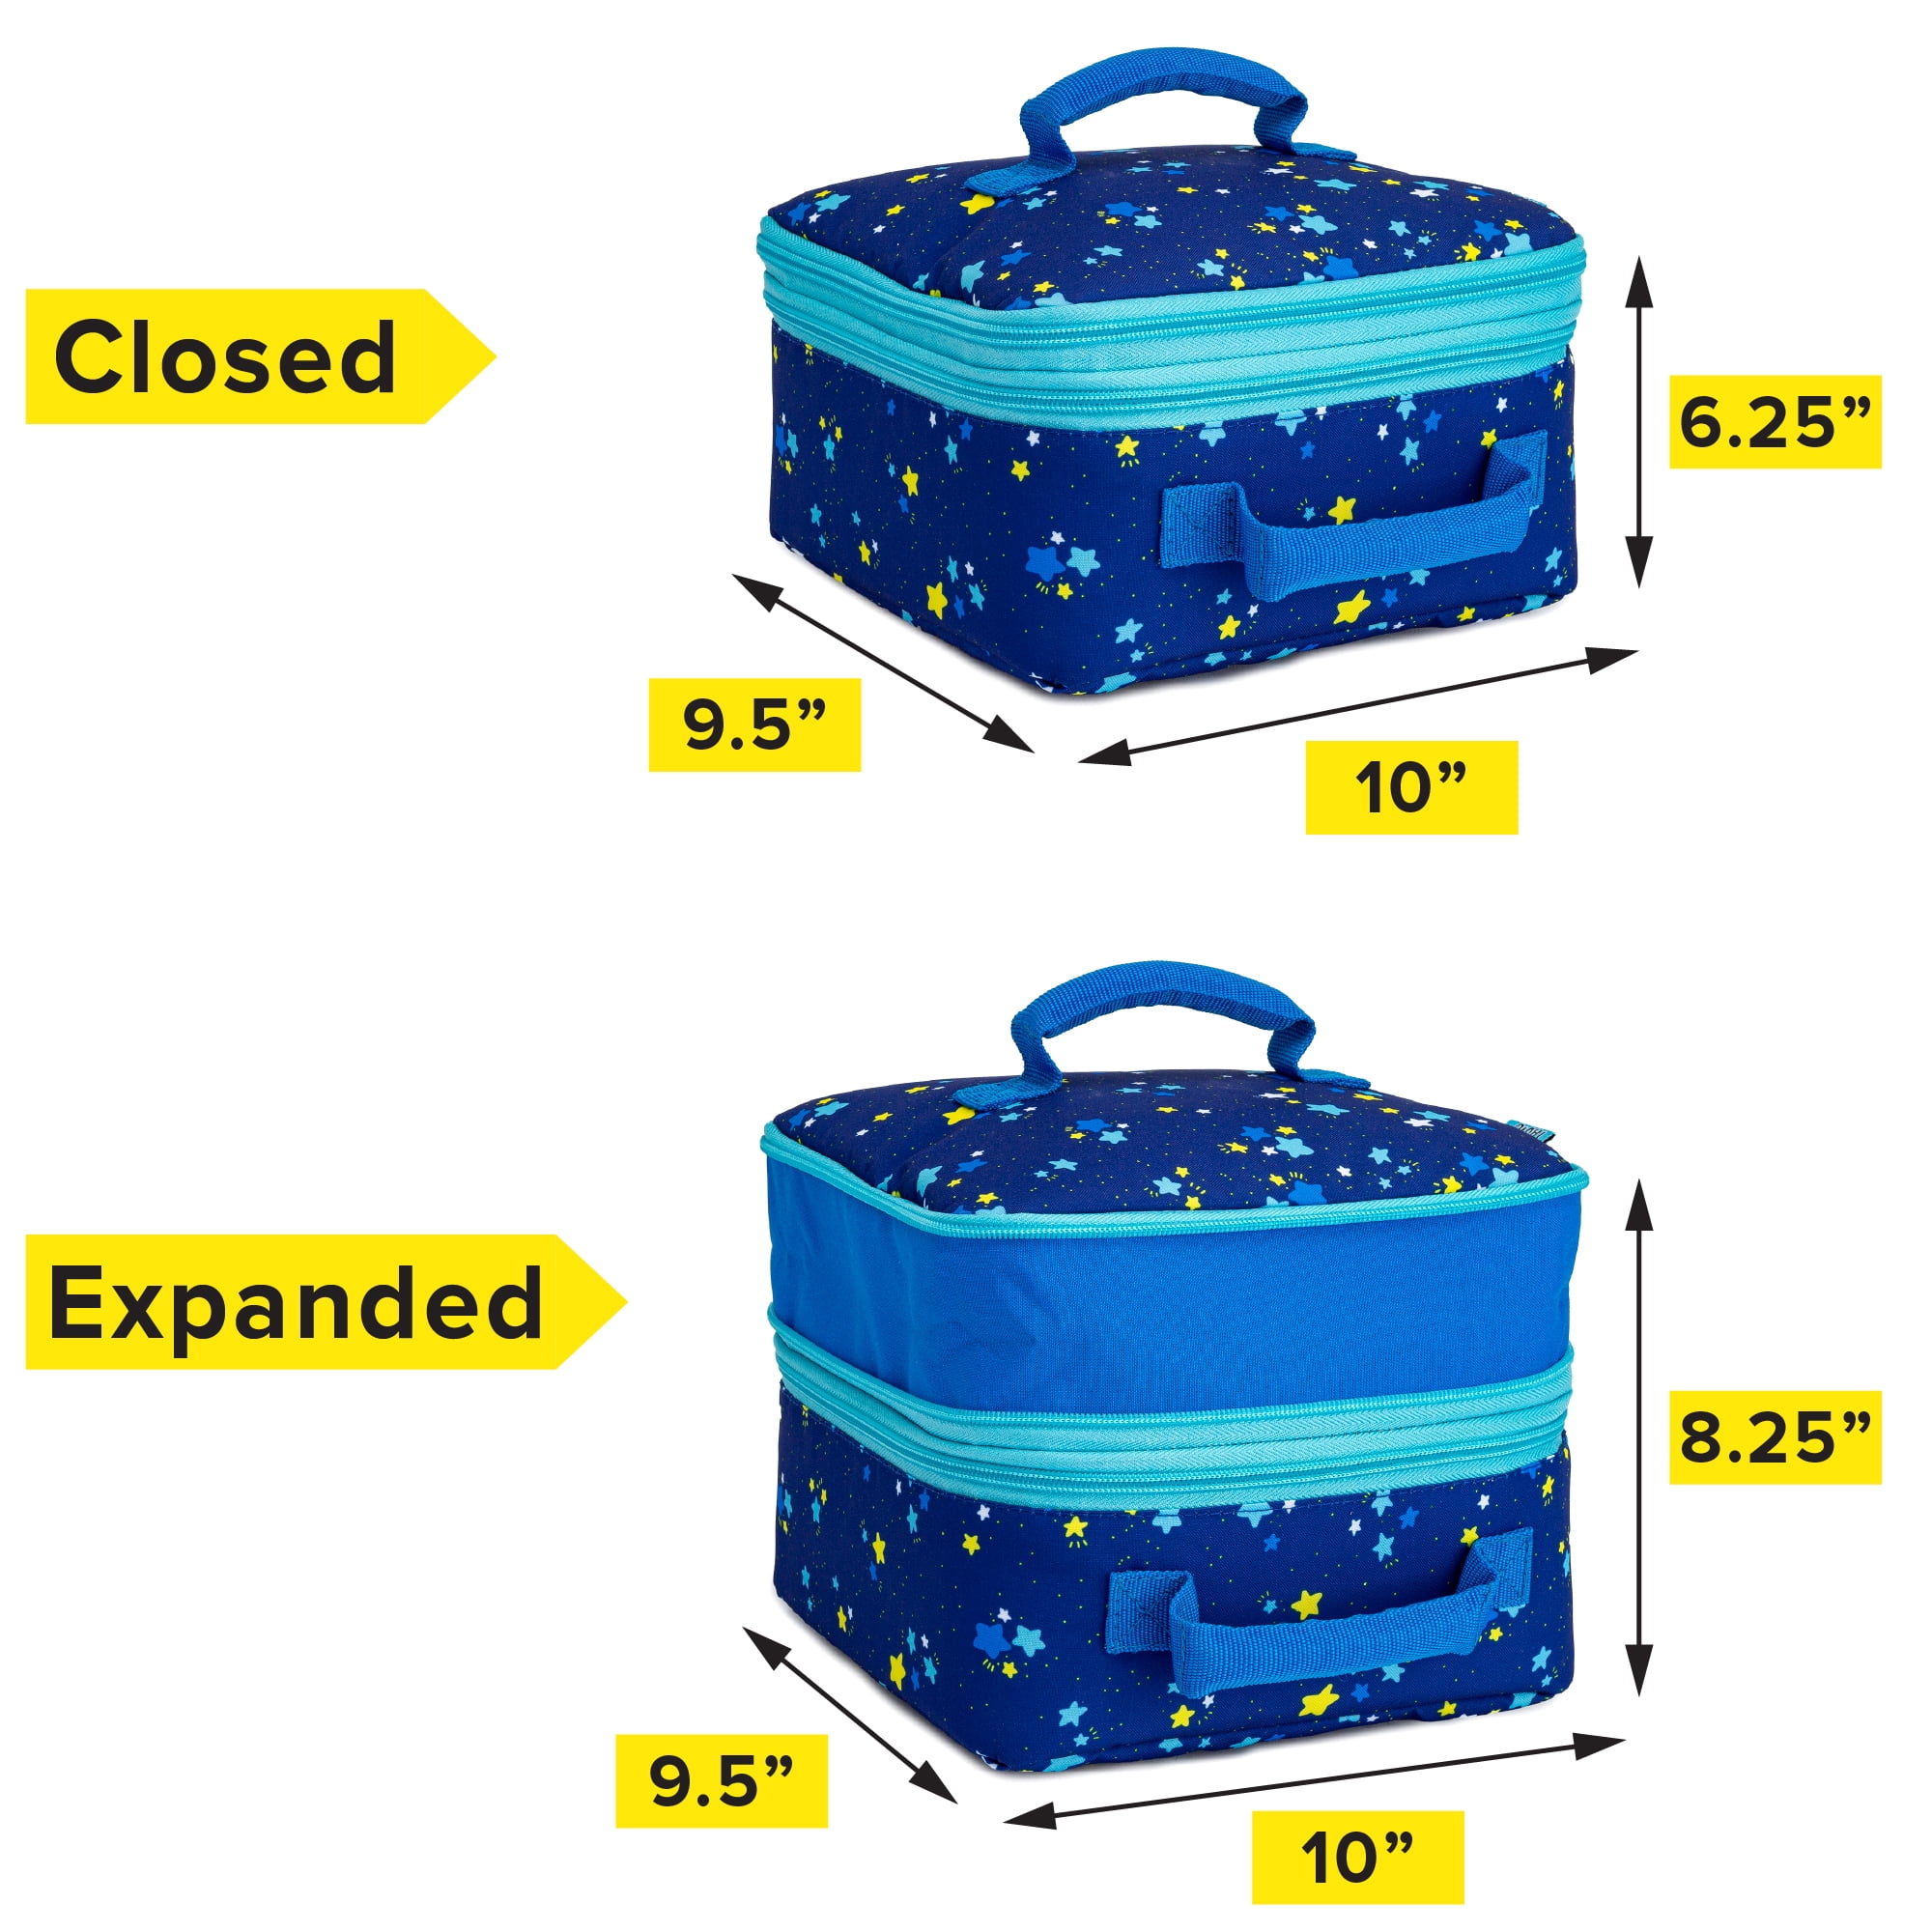 Lucky Stars Soft Insulated Blue Kids Personalized Thermal Lunch Box +  Reviews